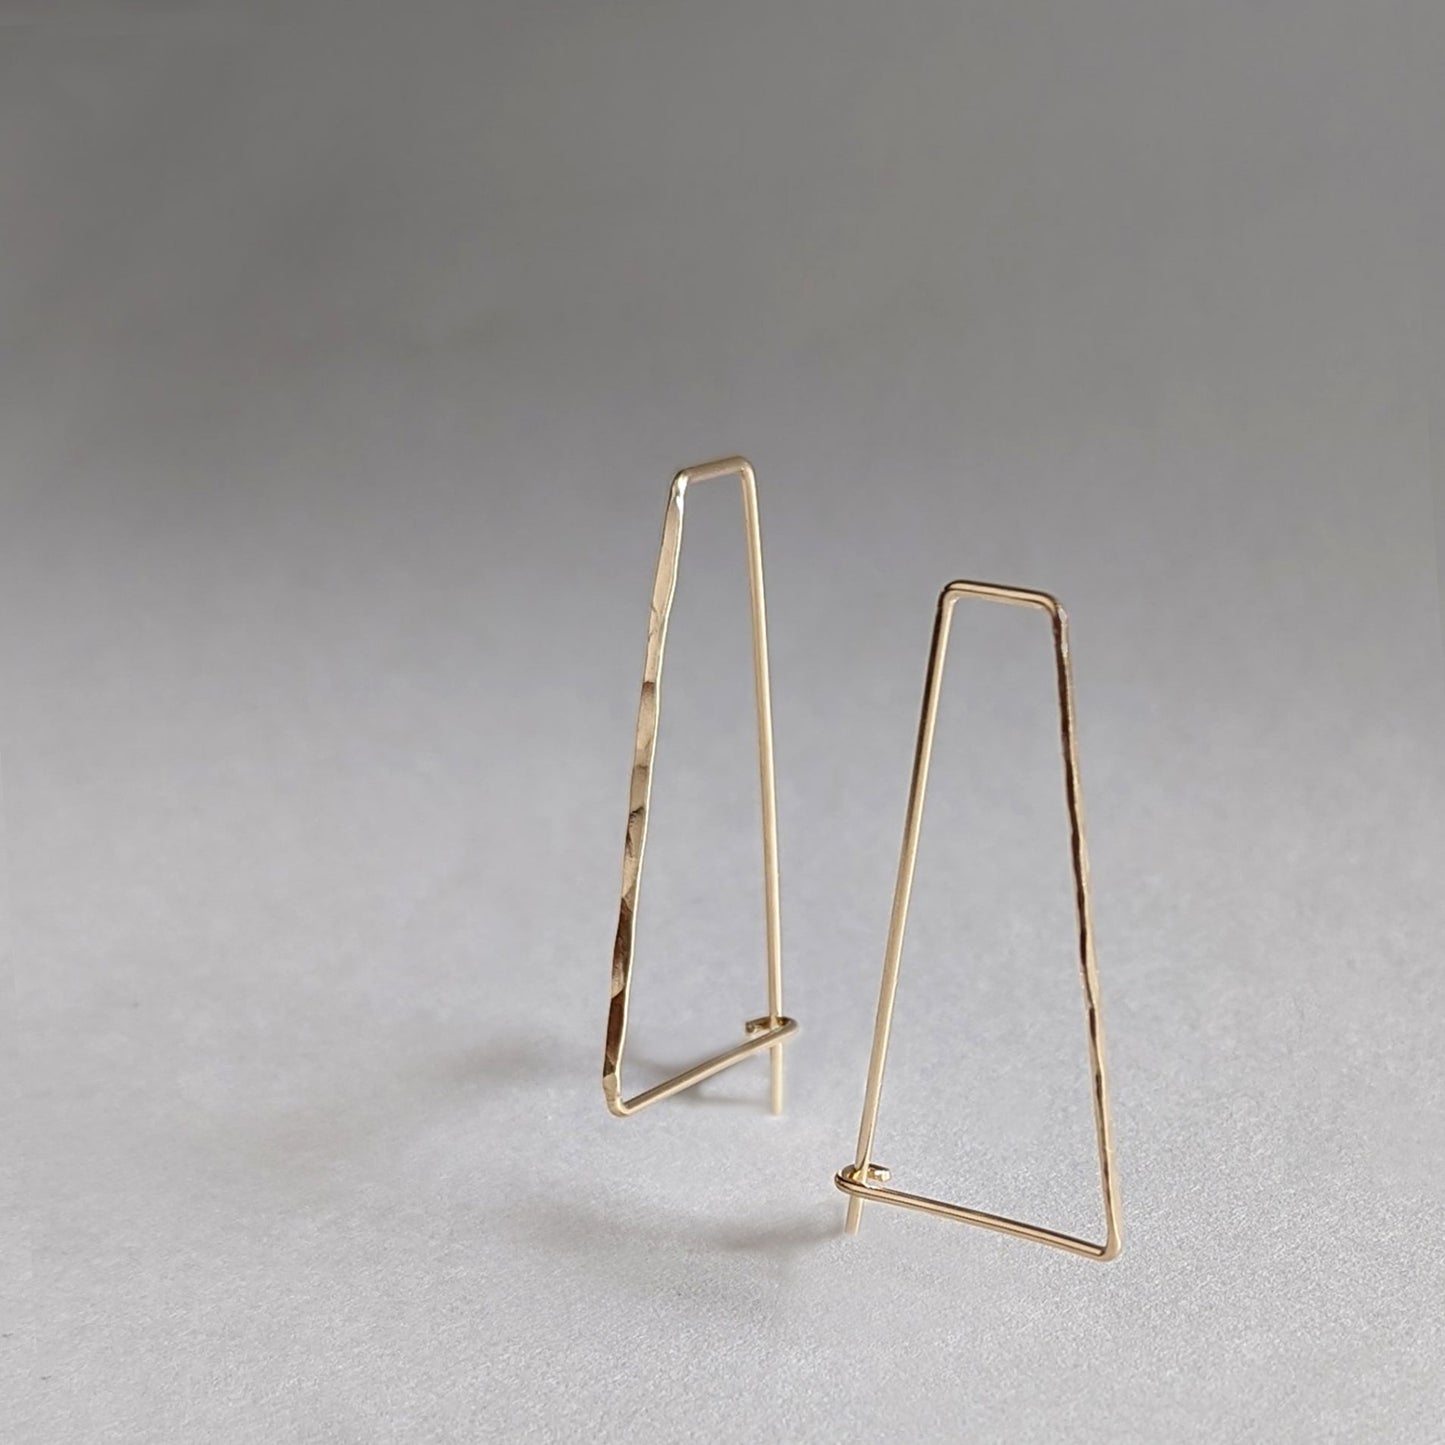 Gold hammered triangle threader hoop earrings